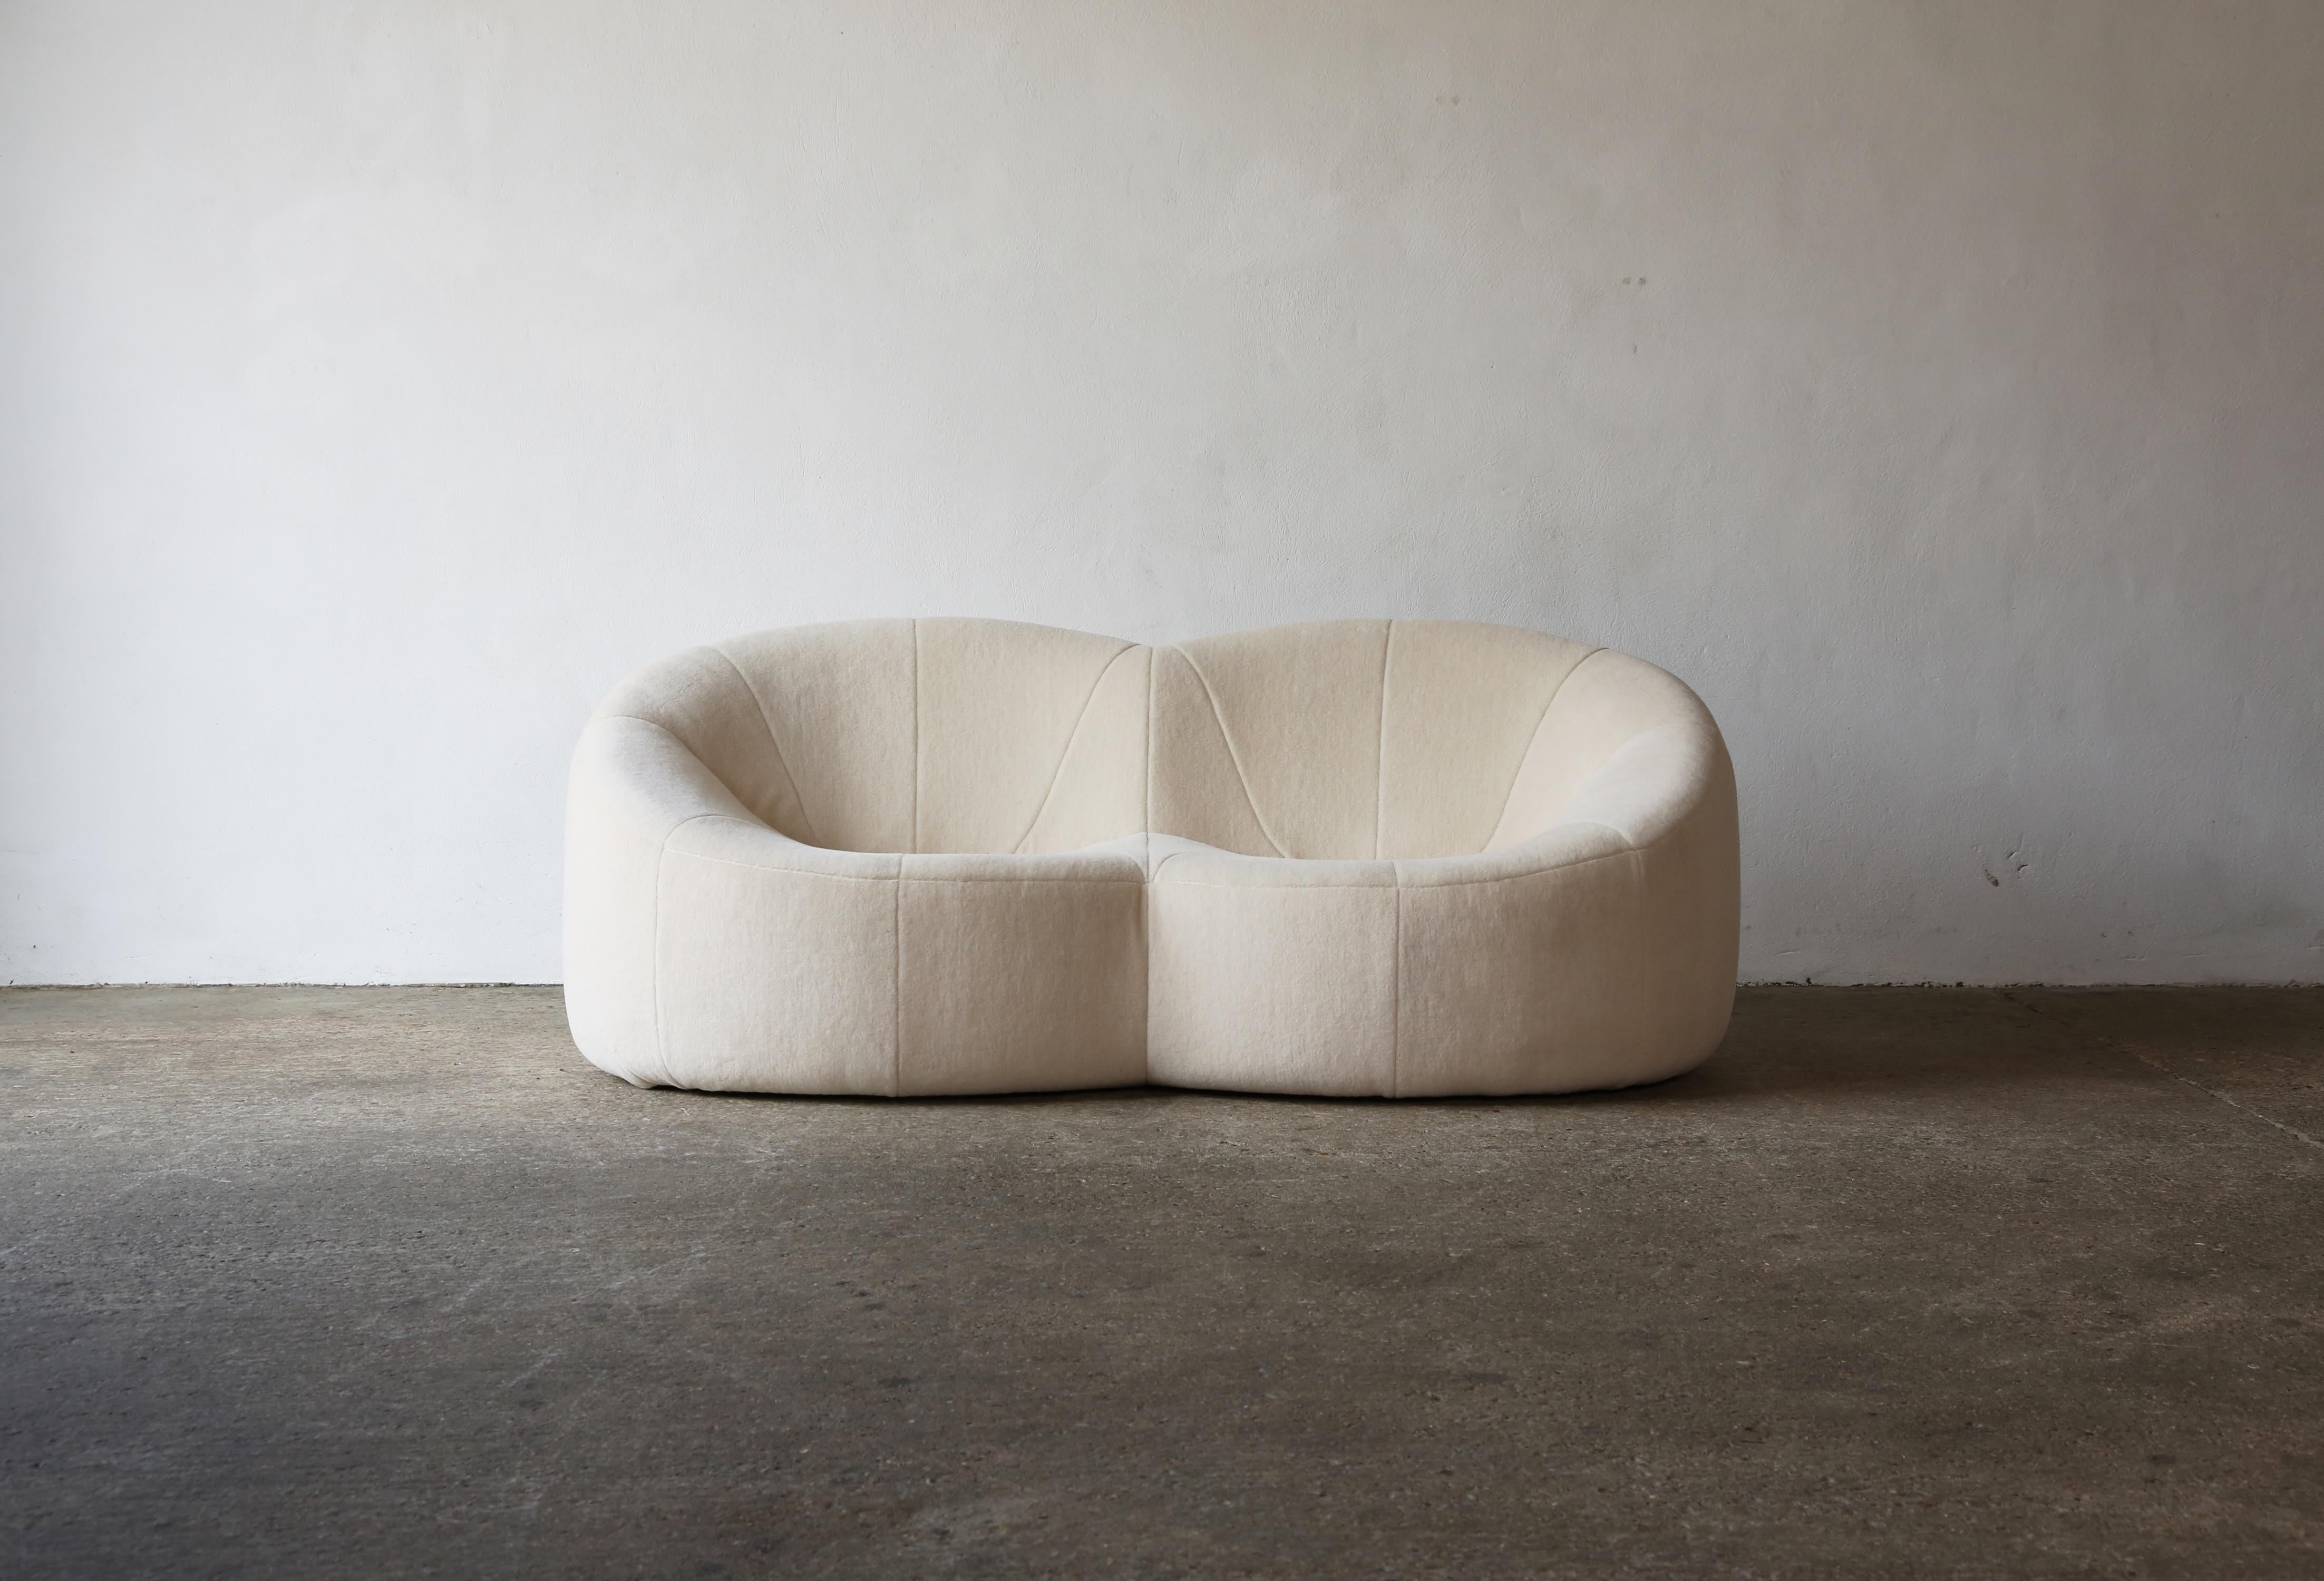 A superb Pierre Paulin for Lignet Roset Pumpkin Sofa, upholstered in luxurious cream pure alpaca wool. Originally designed in 1971 for the private flats of Claude and Georges Pompidou at the Elysée Palace. Fast shipping worldwide.

